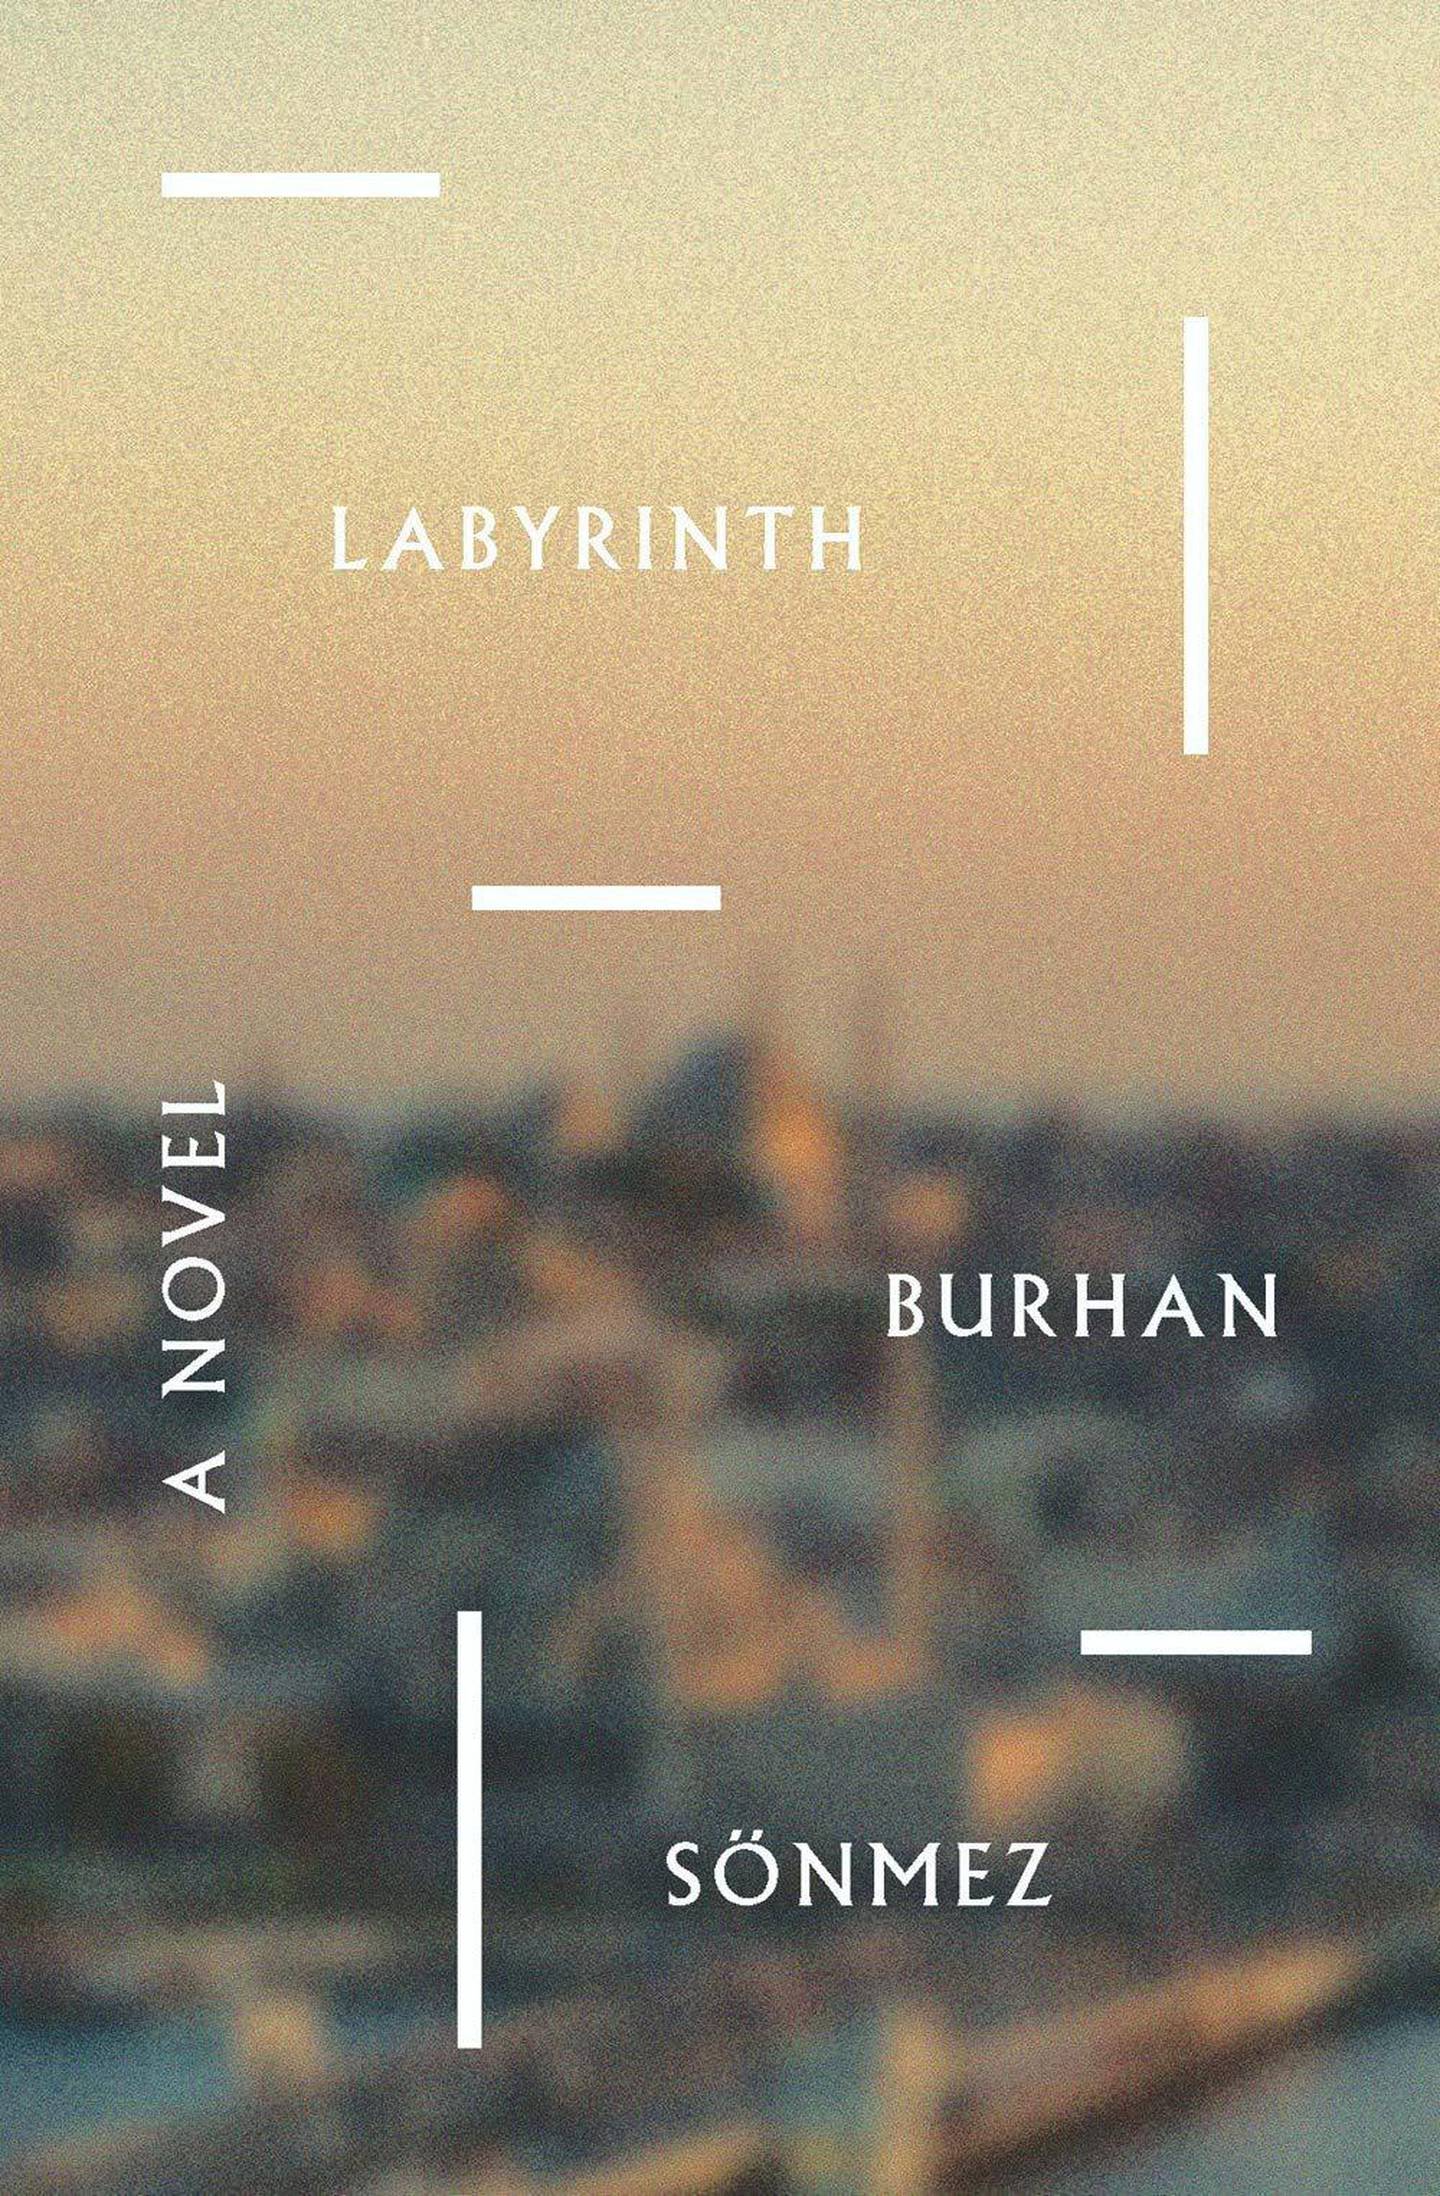 'Labyrinth' is the Turkish writer's fourth novel